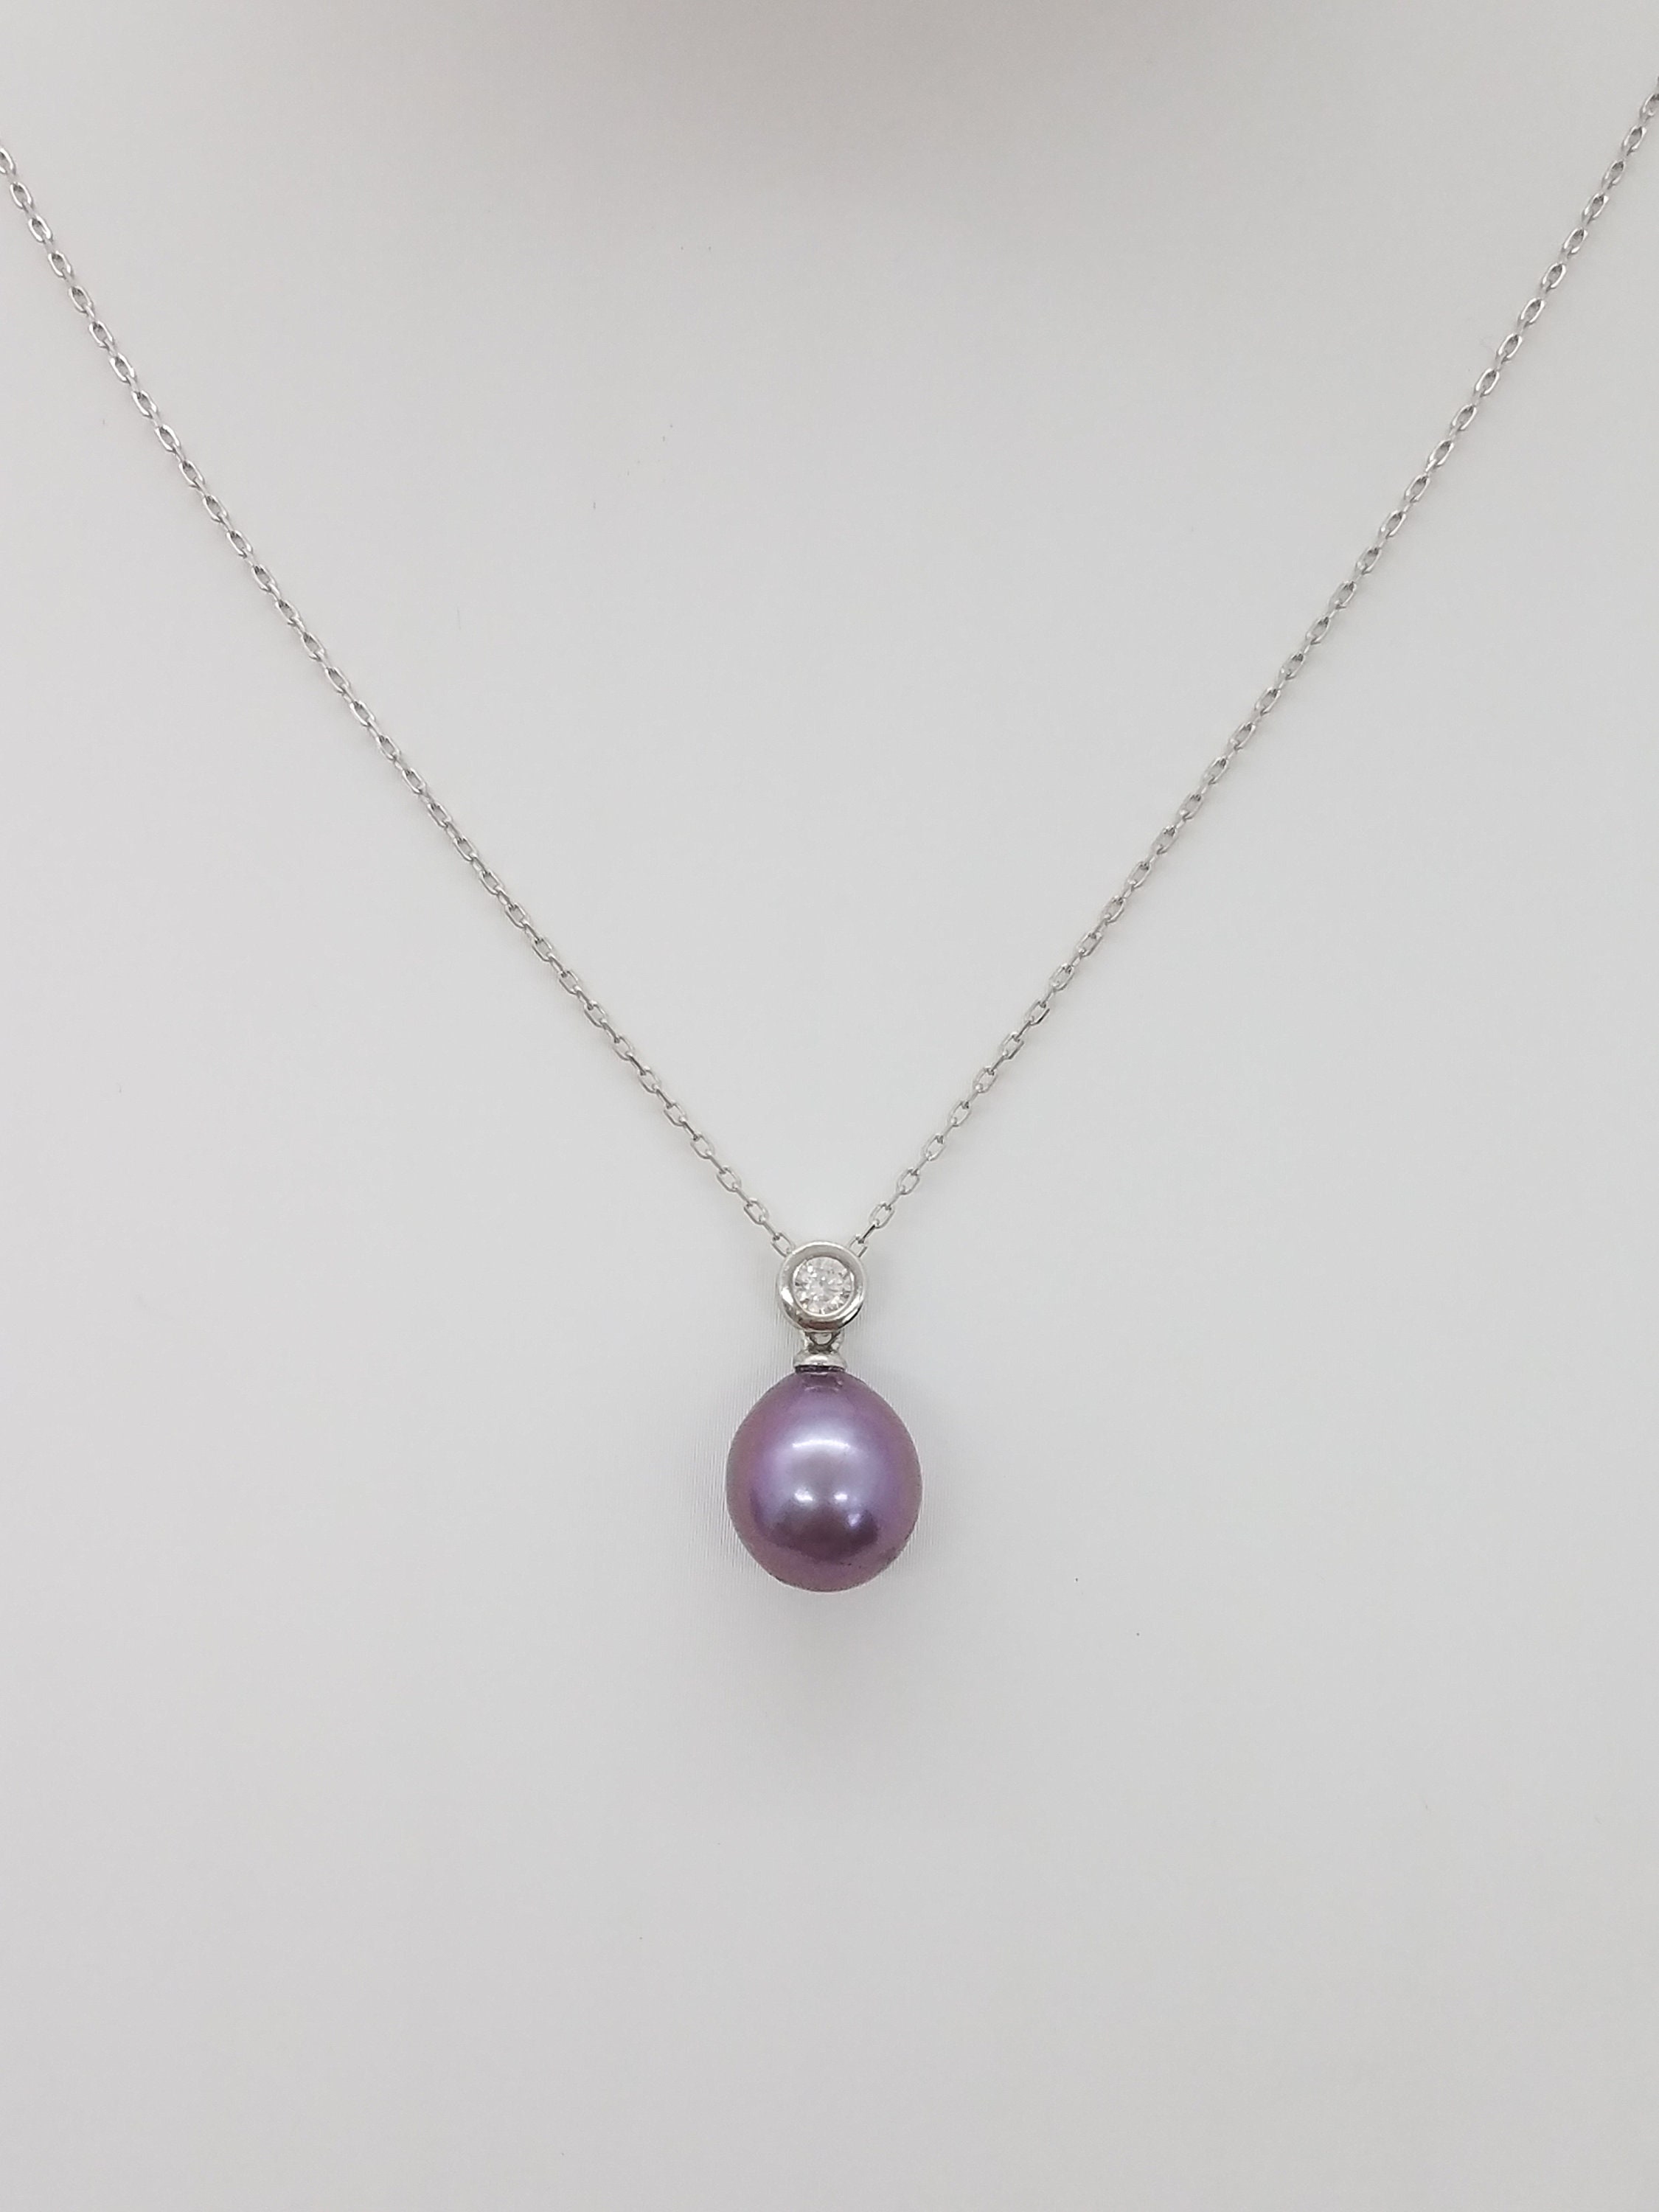 She's So Audrey Sterling Silver & Faux Pearl Necklace – Lavender Boutique